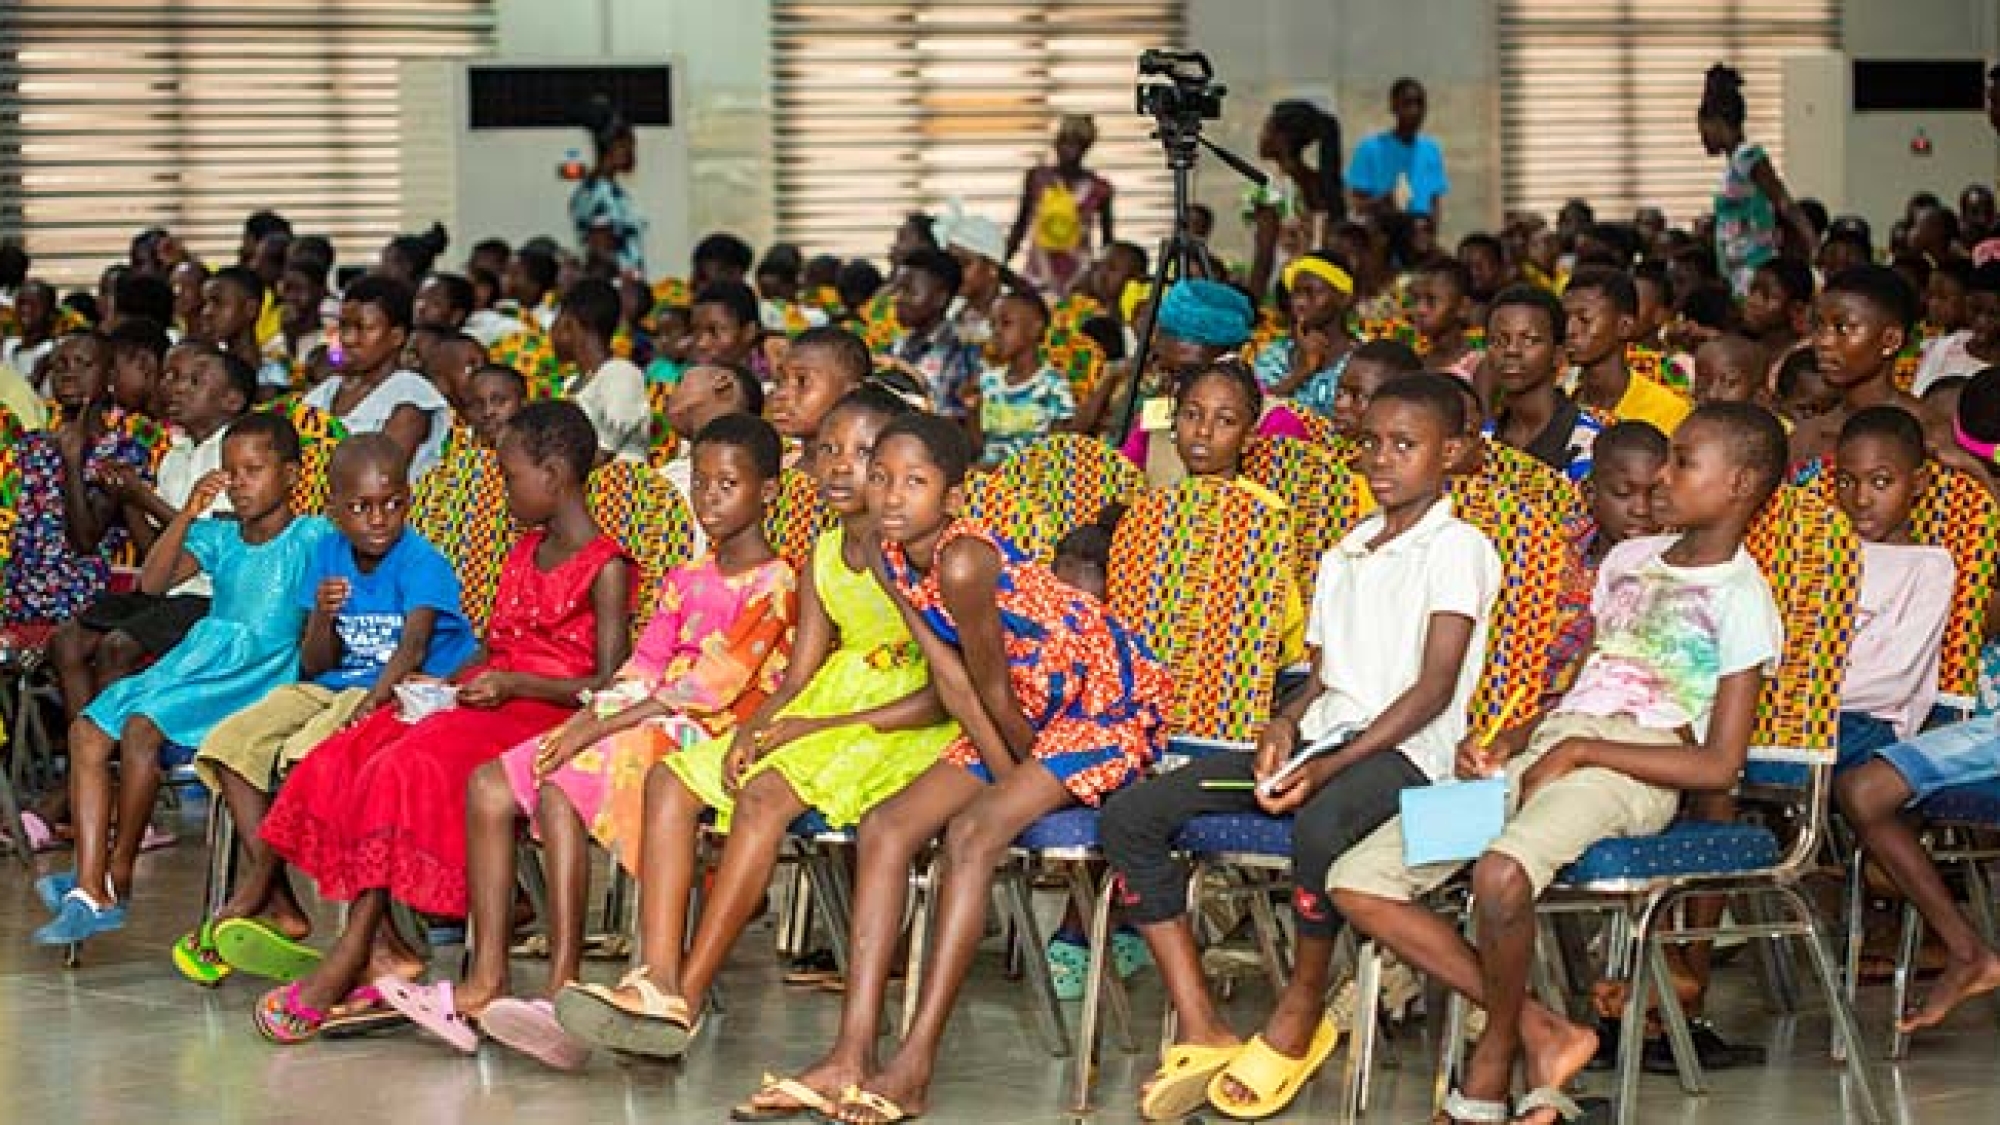 HUM Organises First Edition Of Vulnerable Kids Camp Meeting web